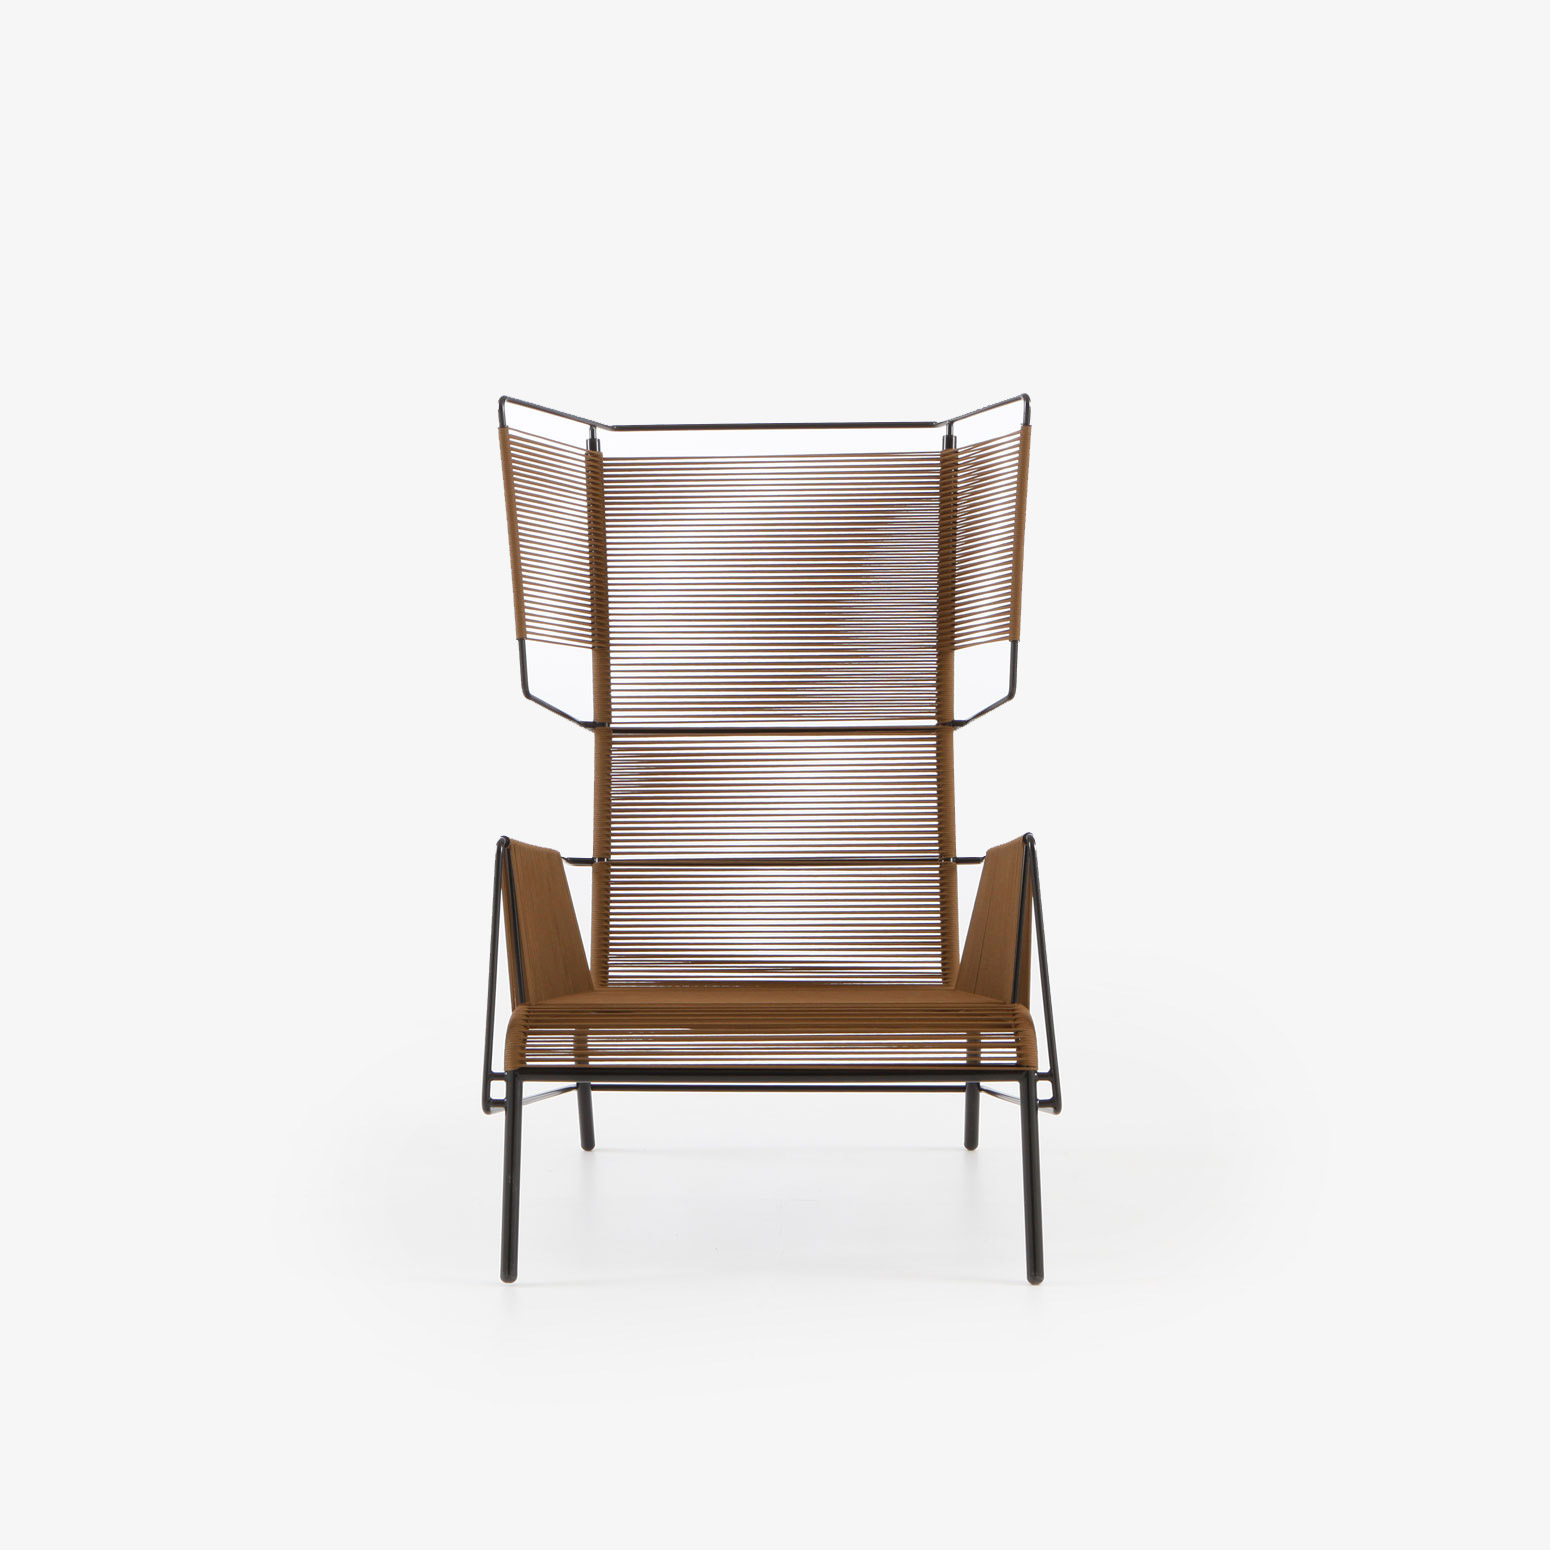 Image Fauteuil tabac indoor / outdoor 1